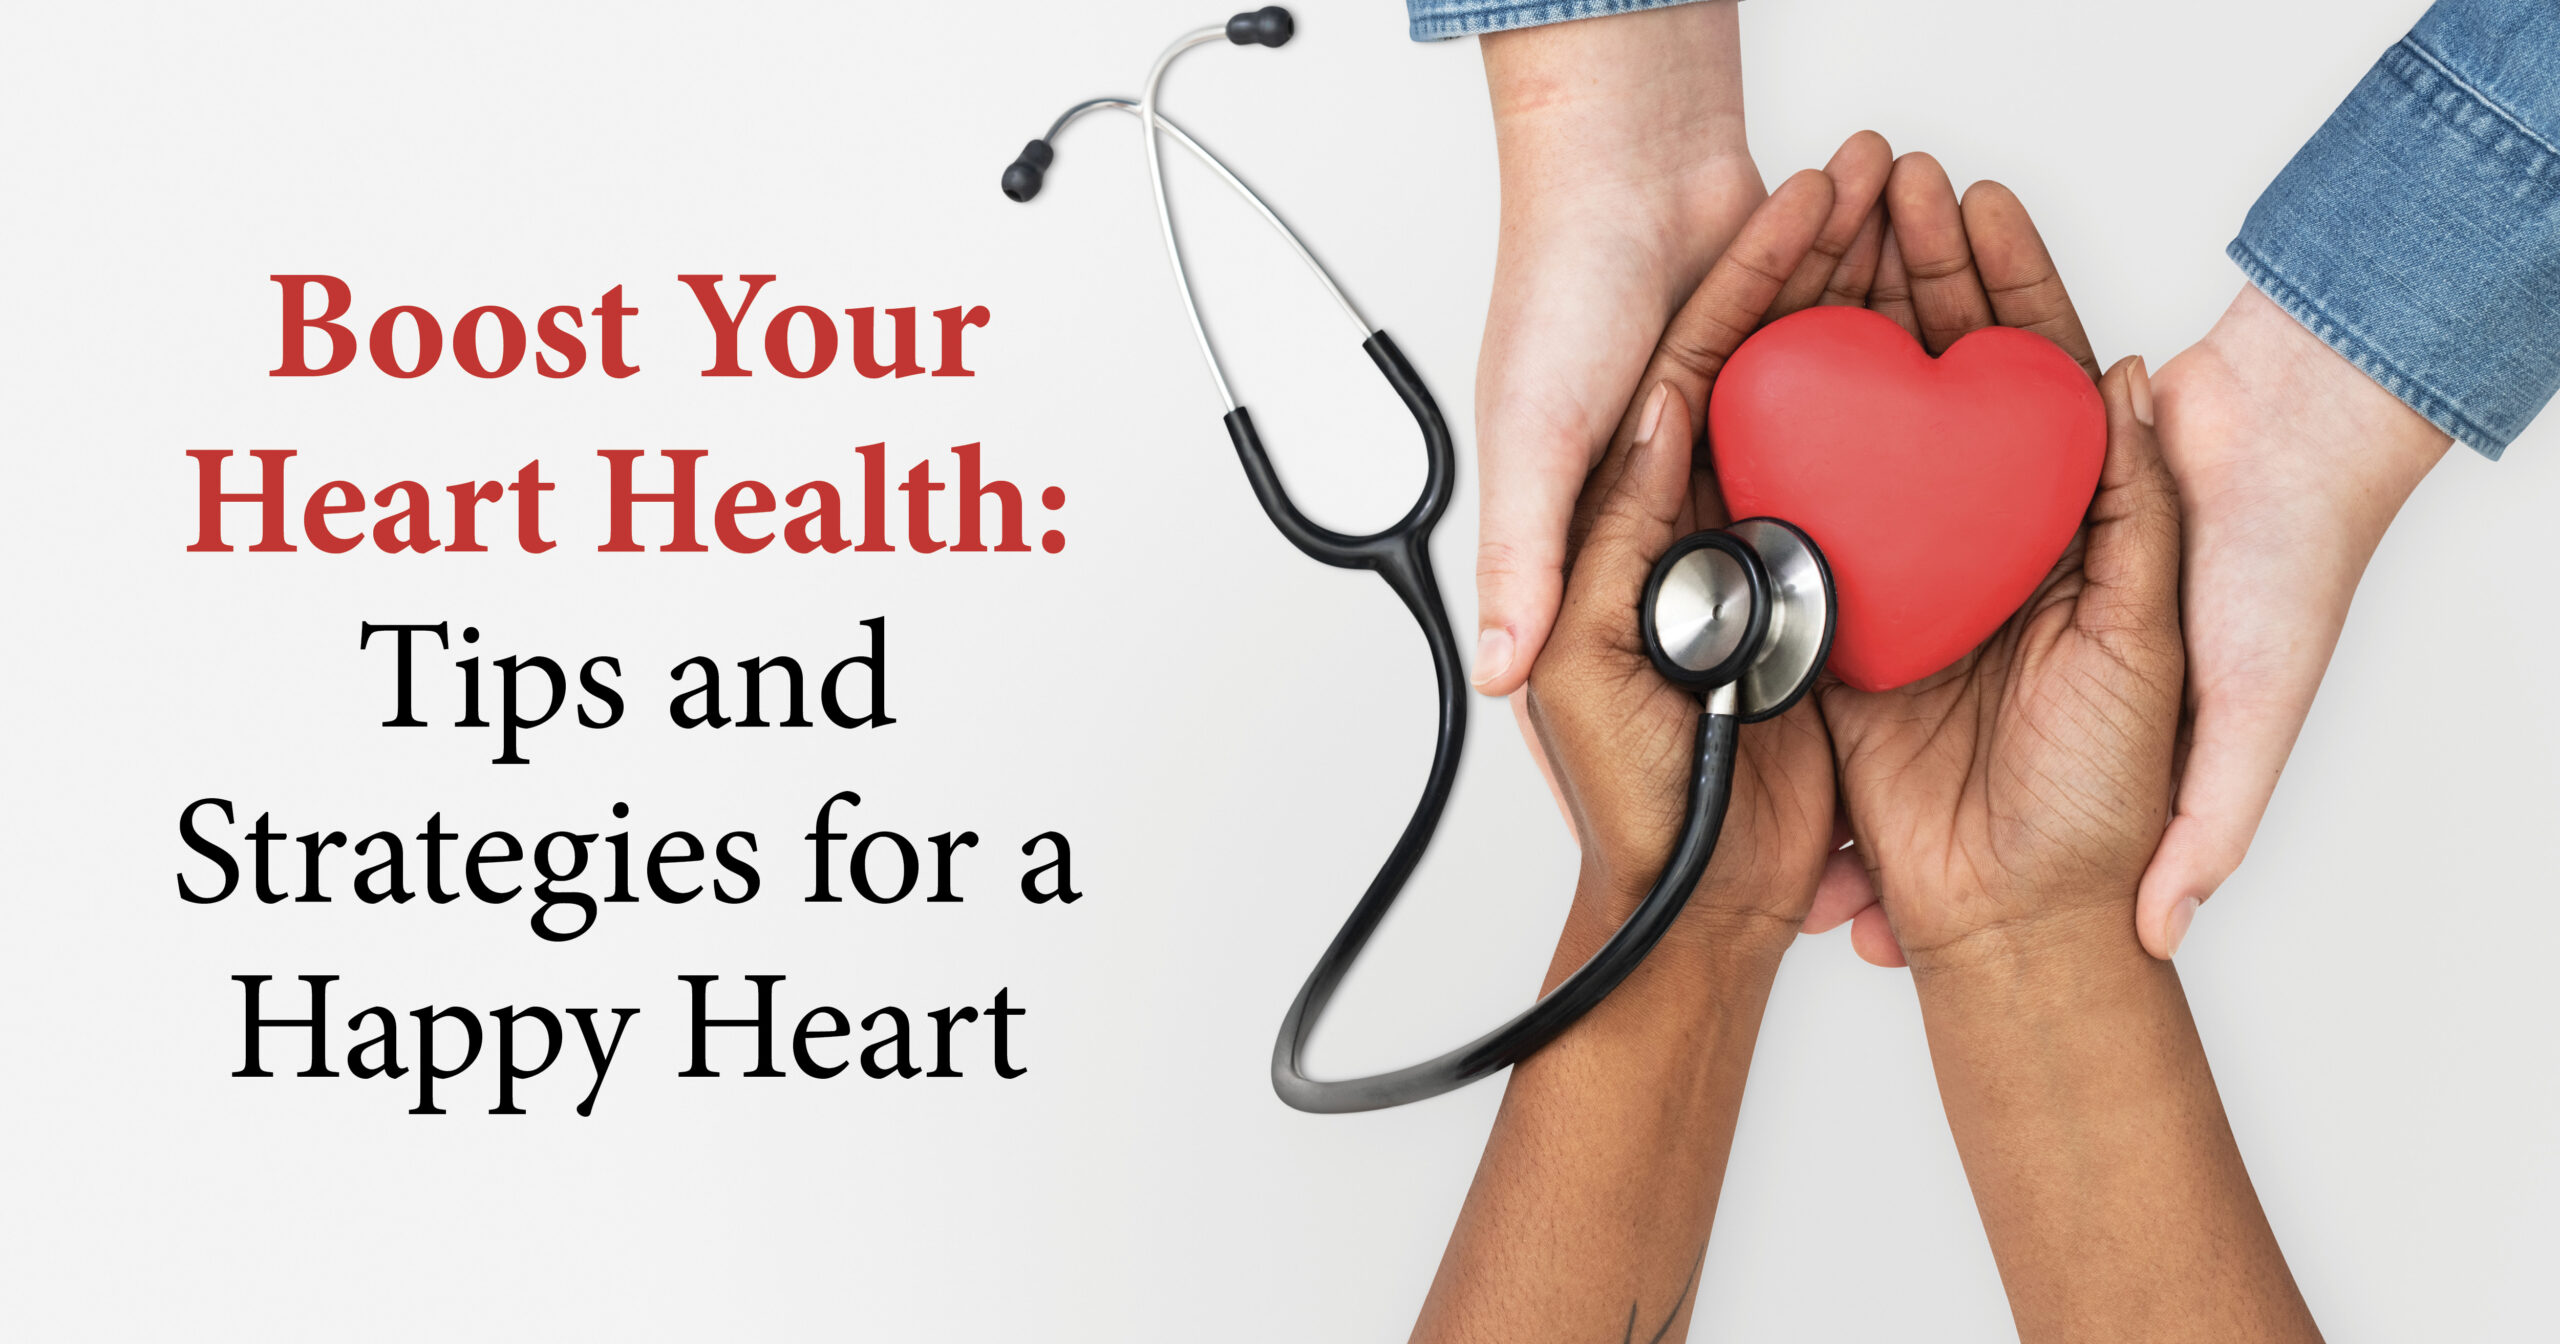 Boost Your Heart Health: Tips and Strategies for a Happy Heart